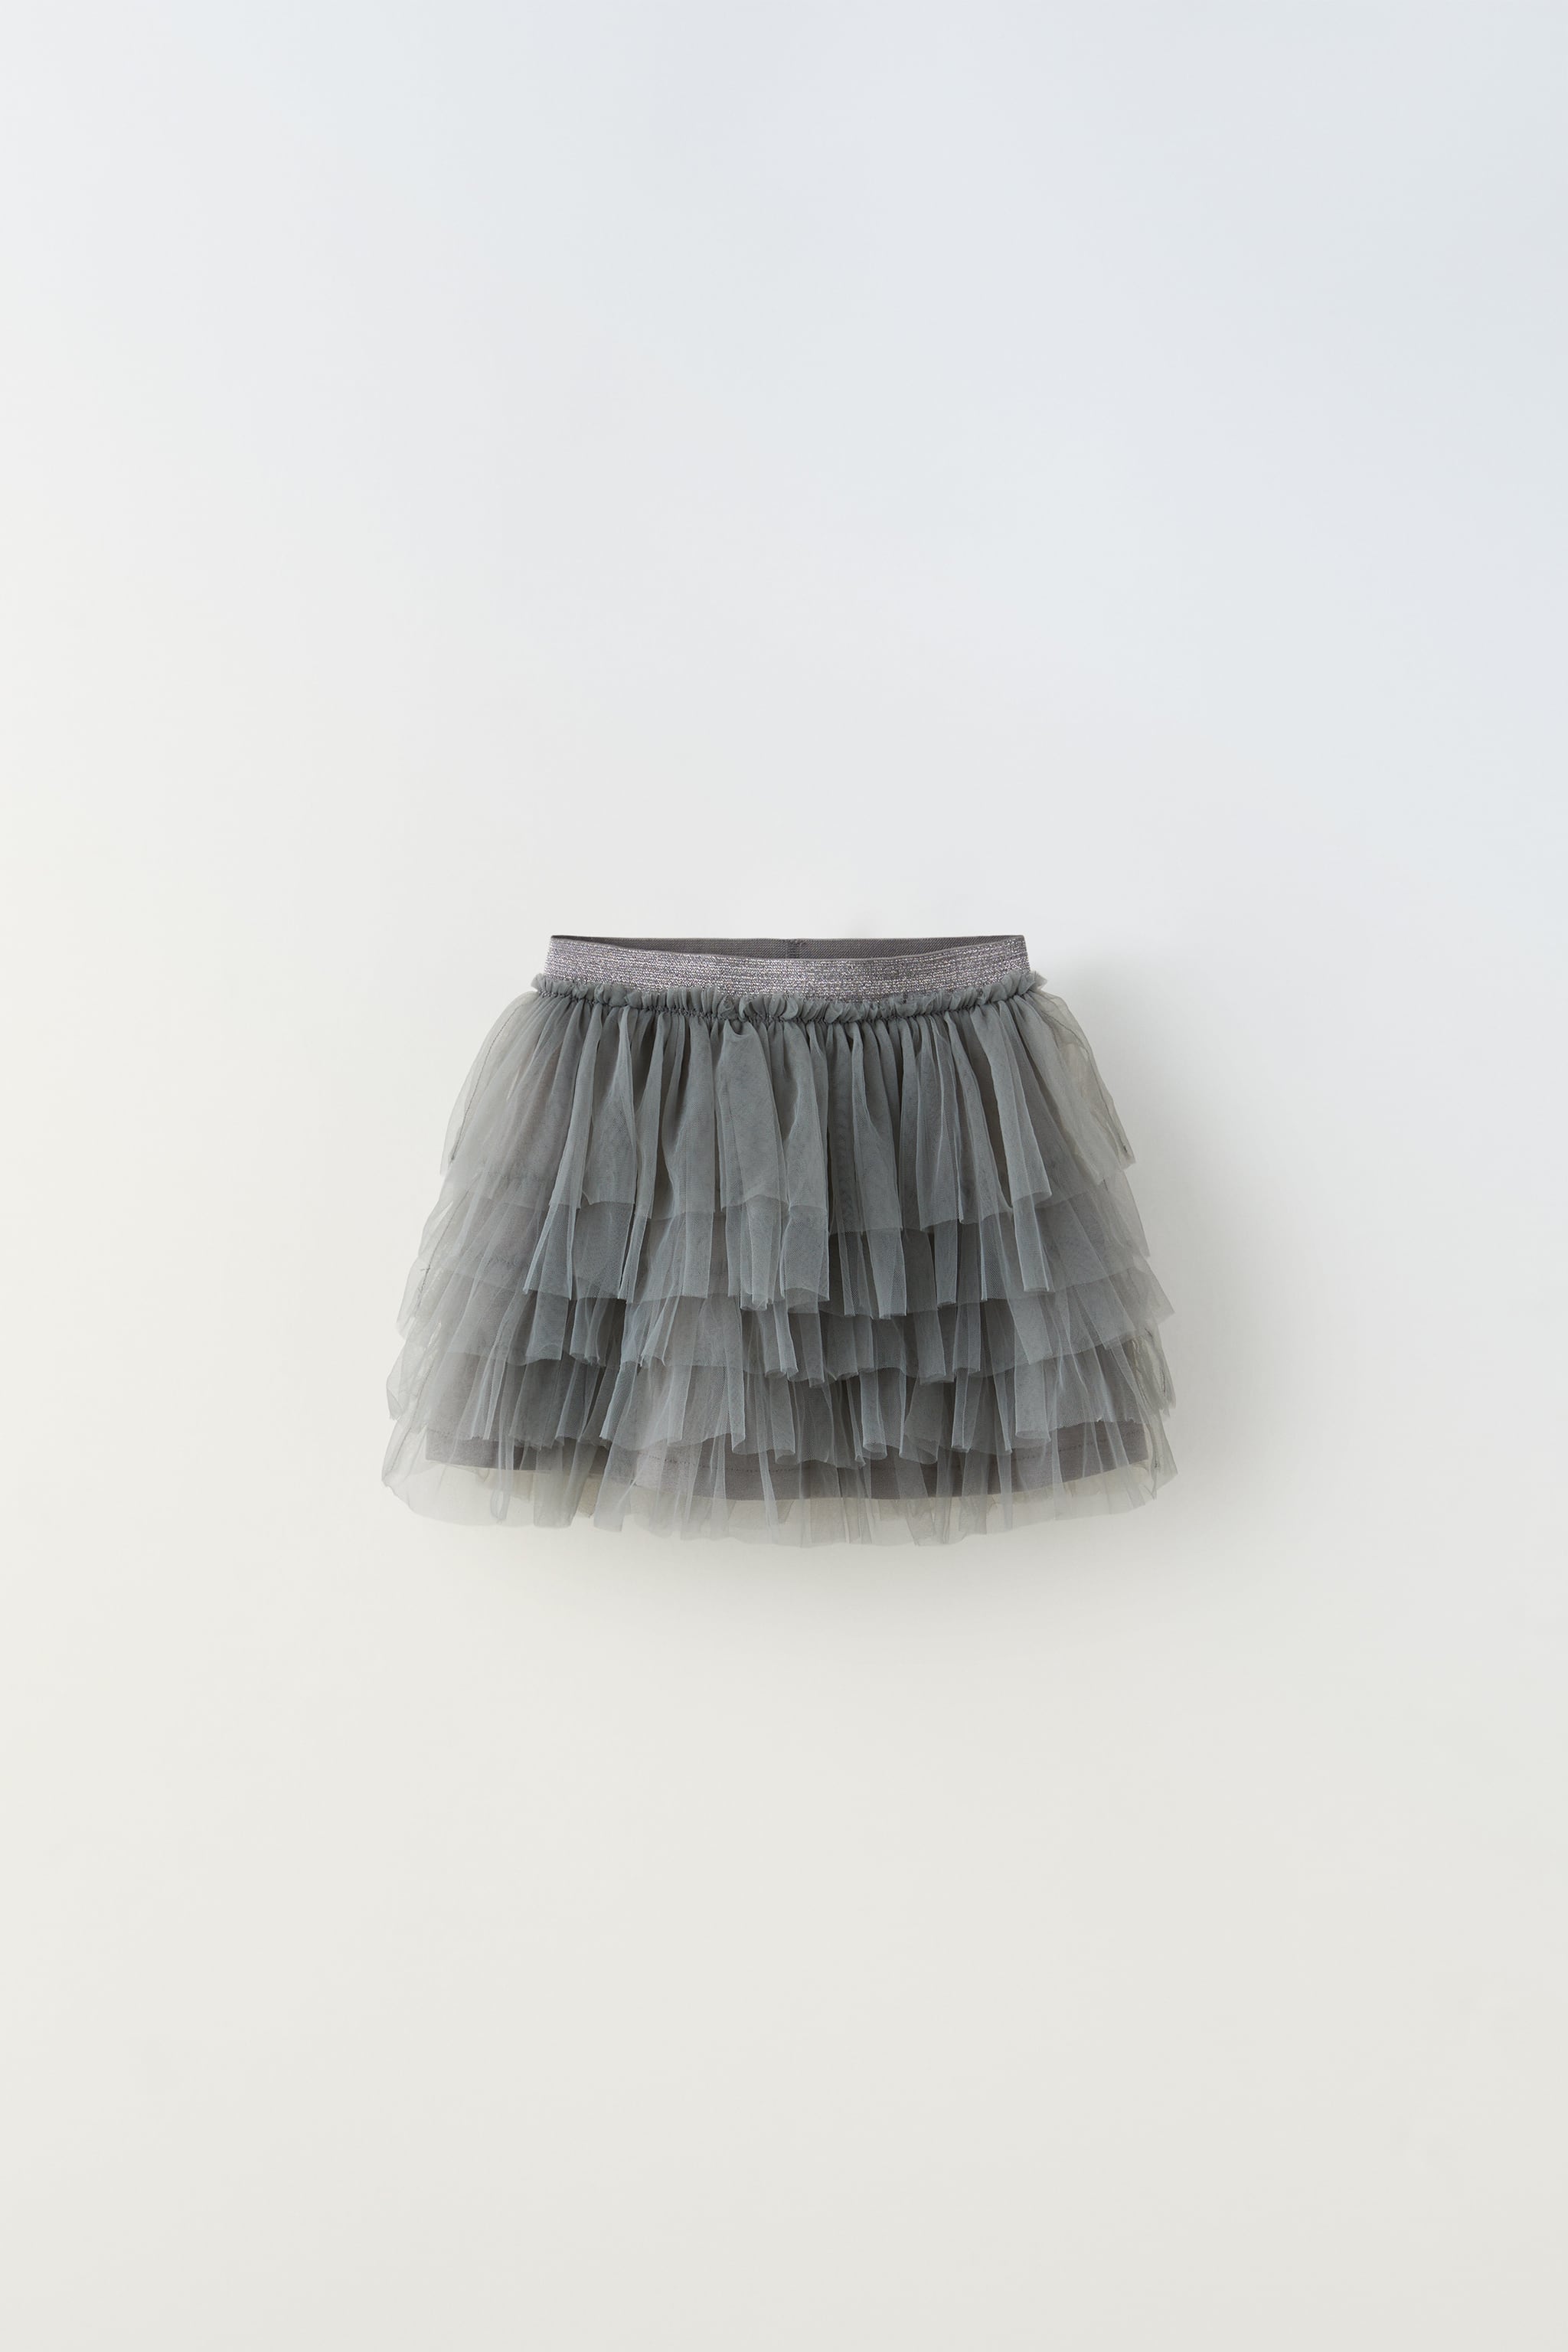 SPARKLY TULLE SKIRT